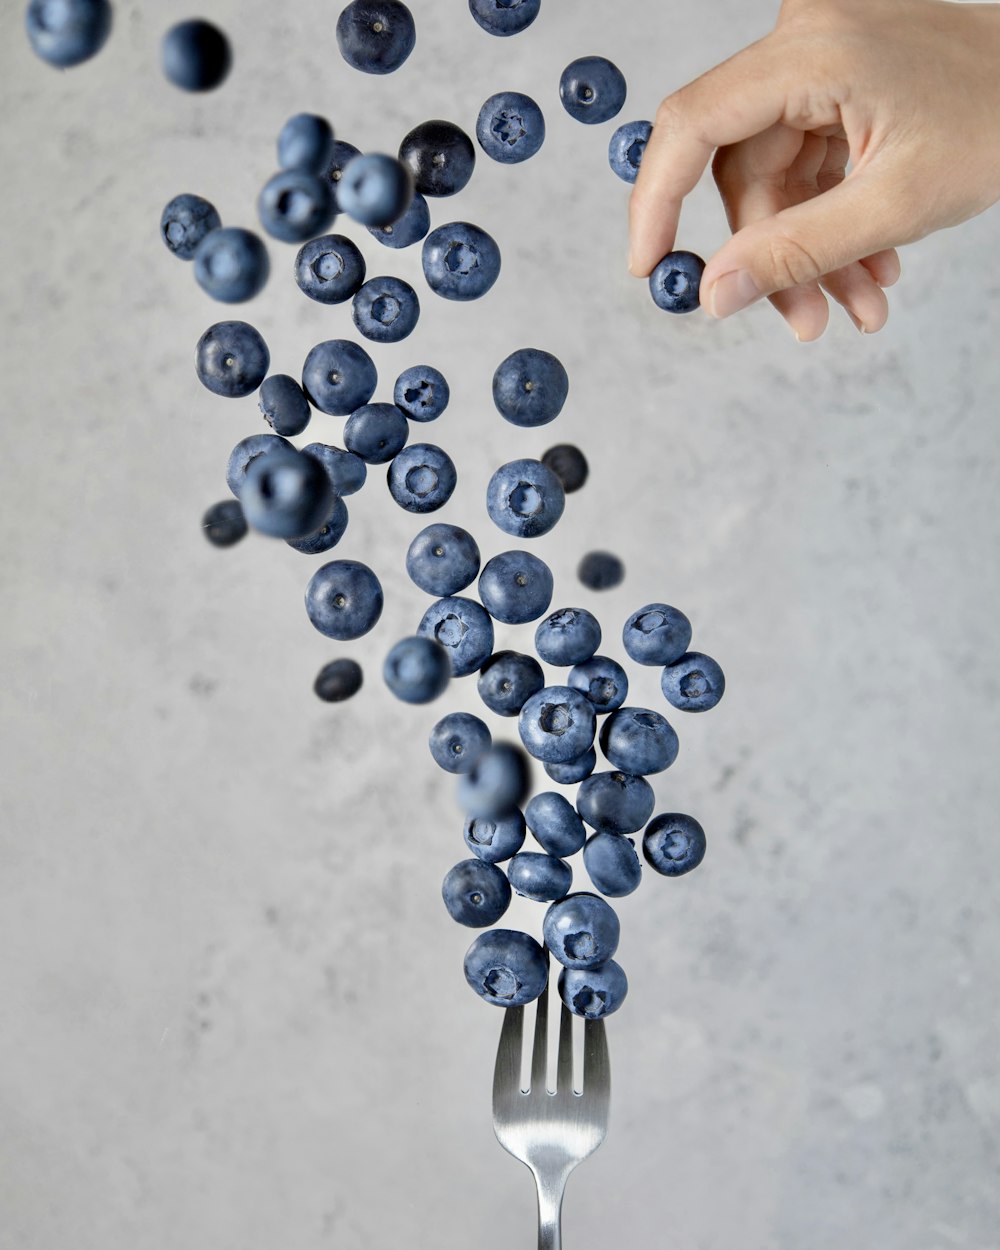 a hand holding a fork over a pile of blueberries